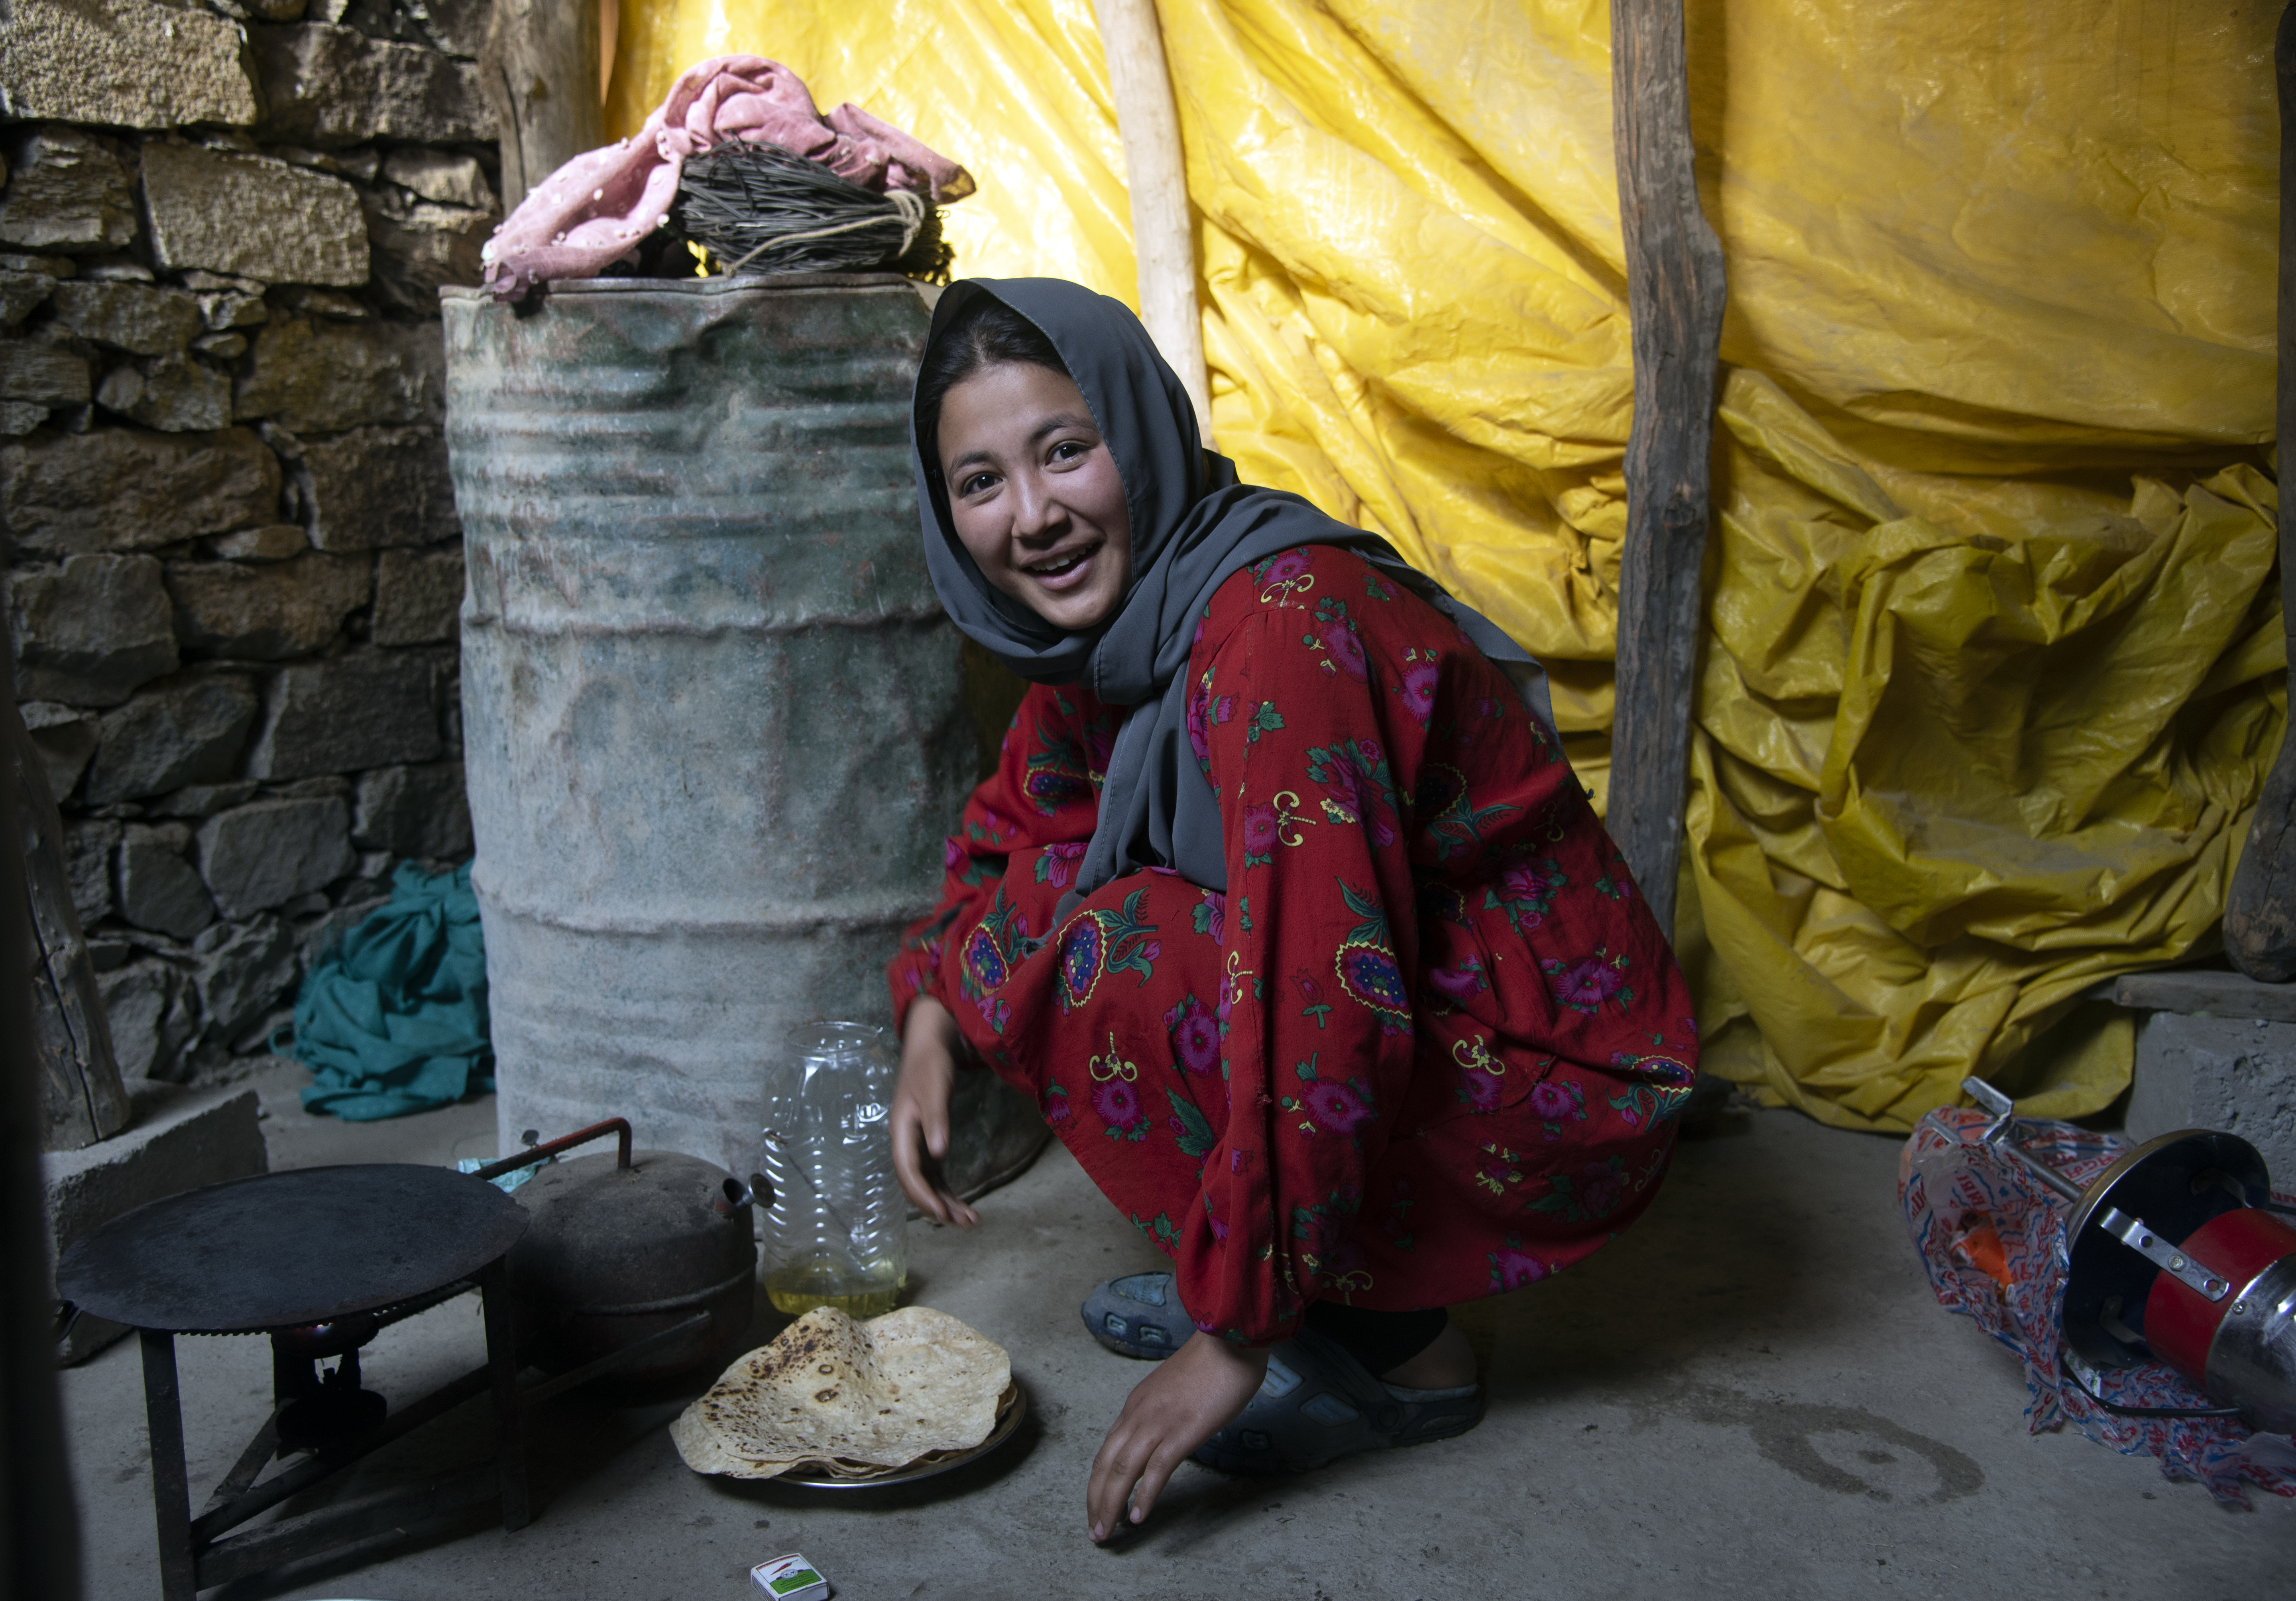 A woman squats, waiting for her water canister to fill at an outside tap (image: Sugato Mukherjee)